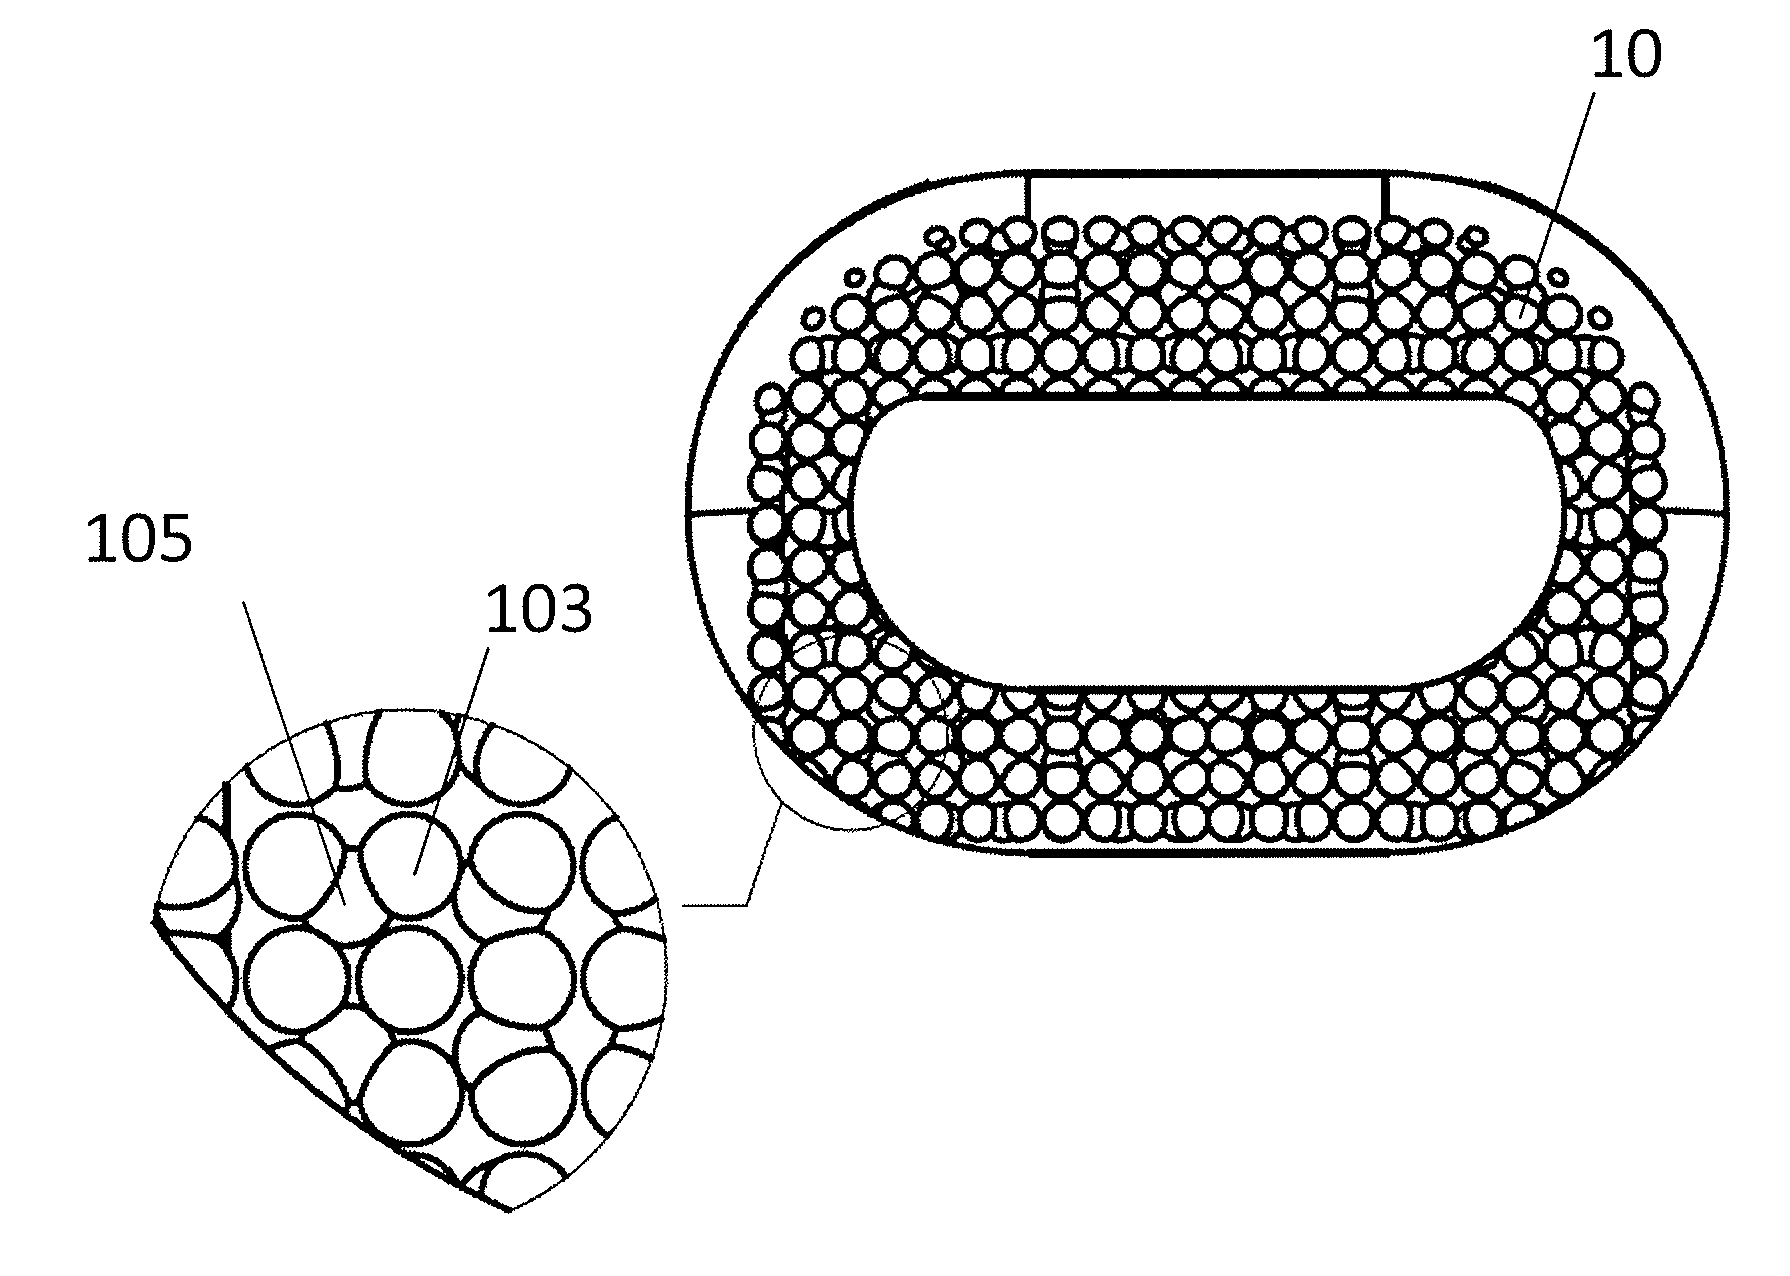 Implants with integration surfaces having regular repeating surface patterns